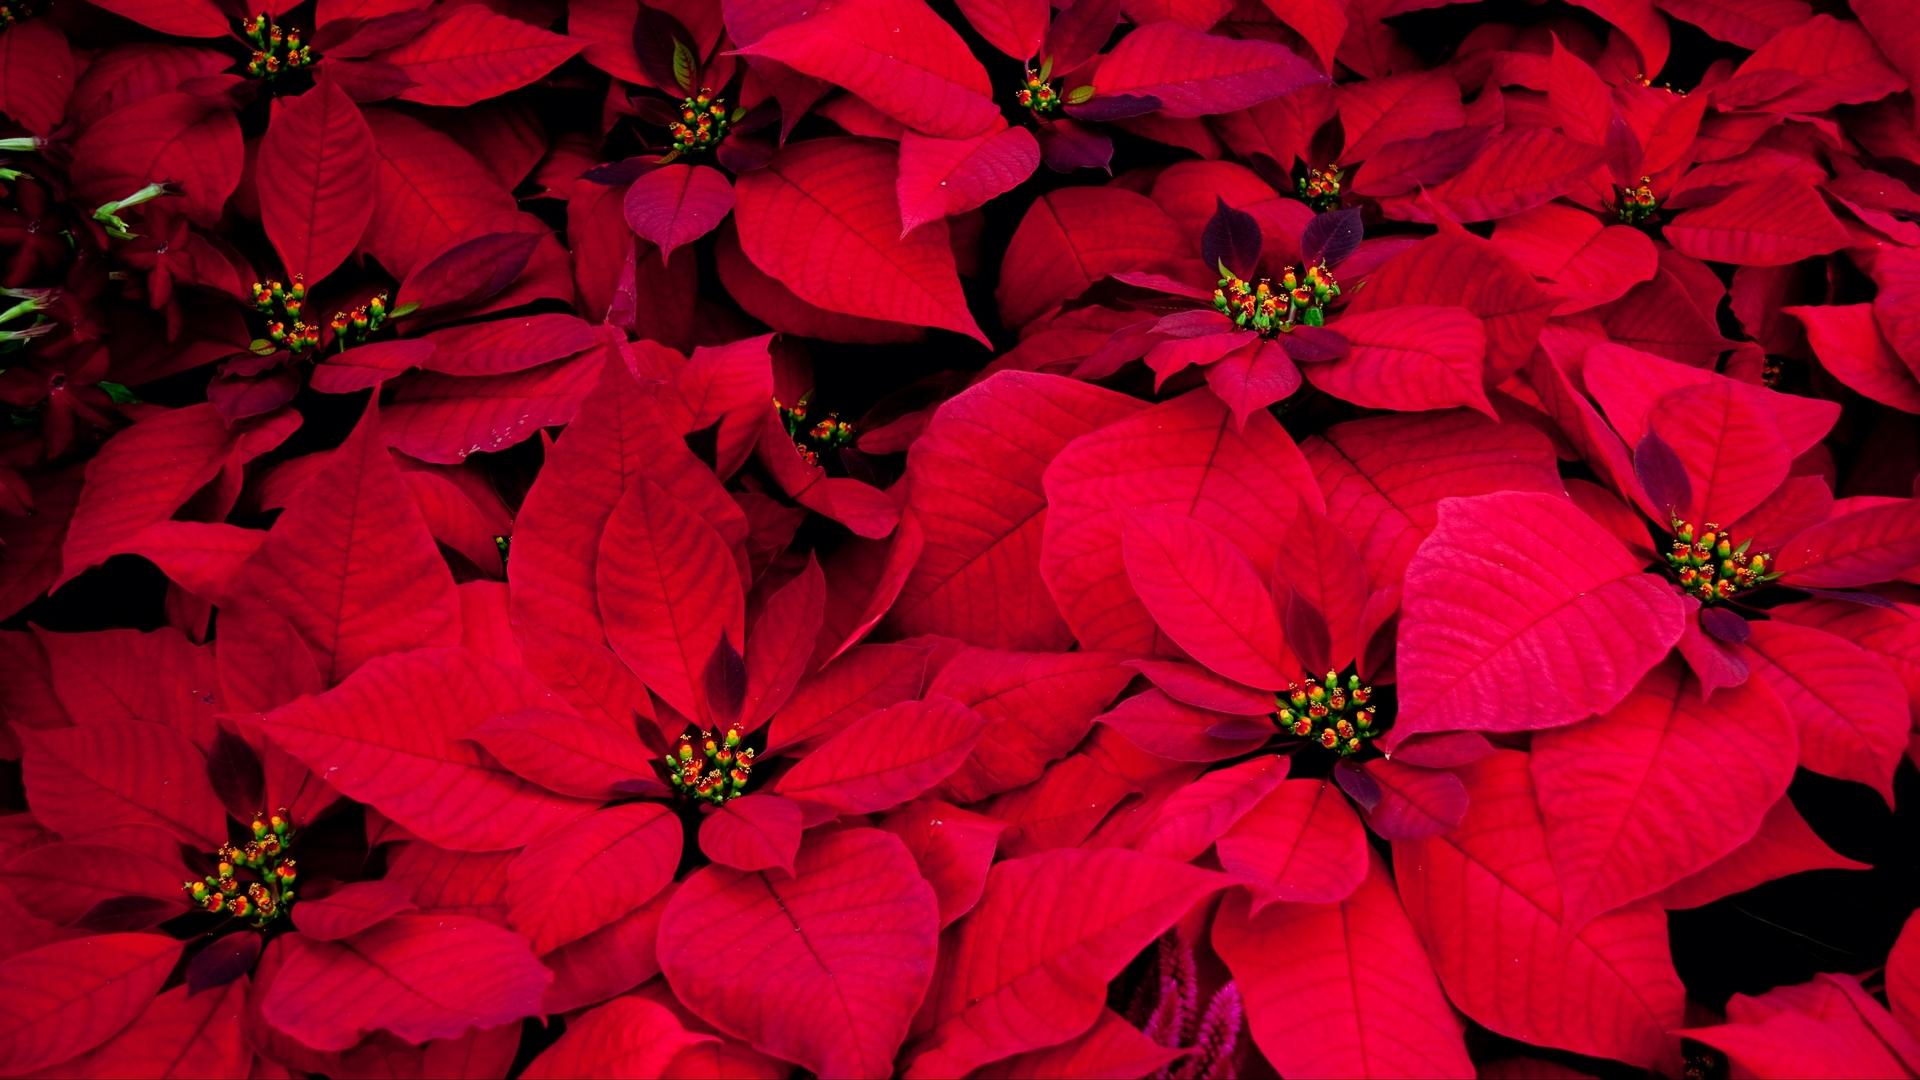 Download wallpaper 1920x1080 poinsettia, flowers, red